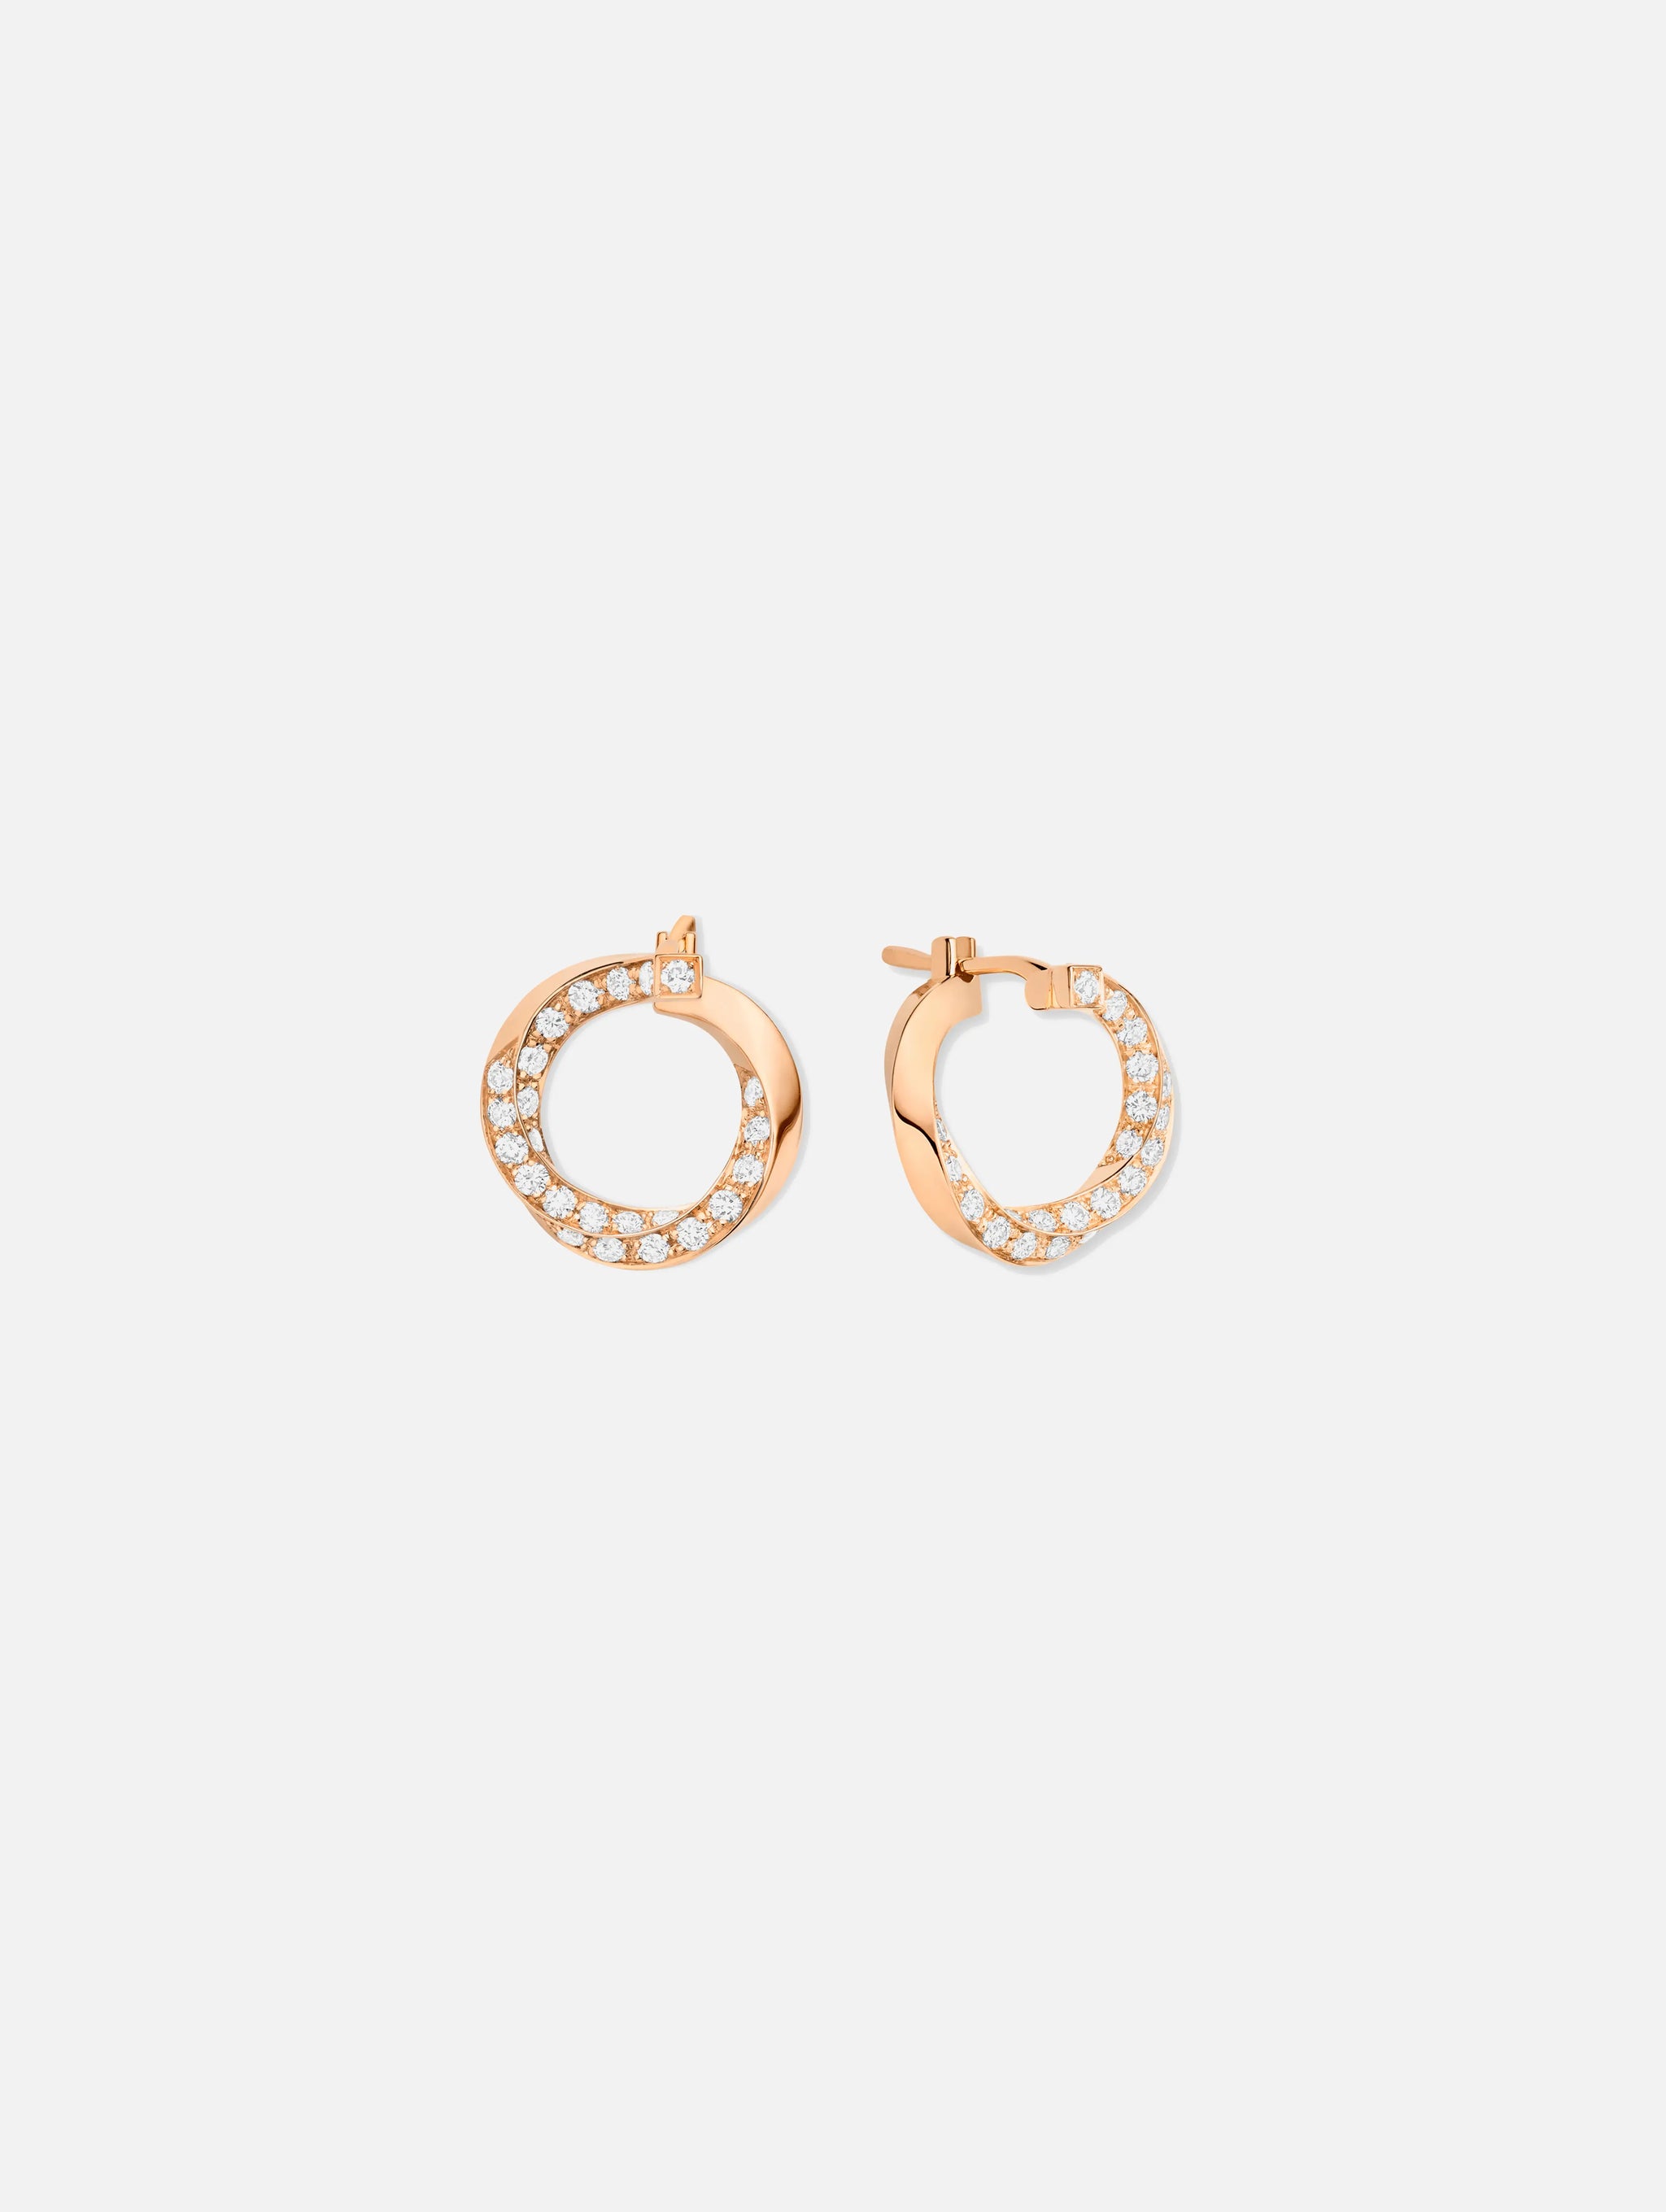 Diamond Thread Earrings in Rose Gold - Nouvel Heritage - Nouvel Heritage